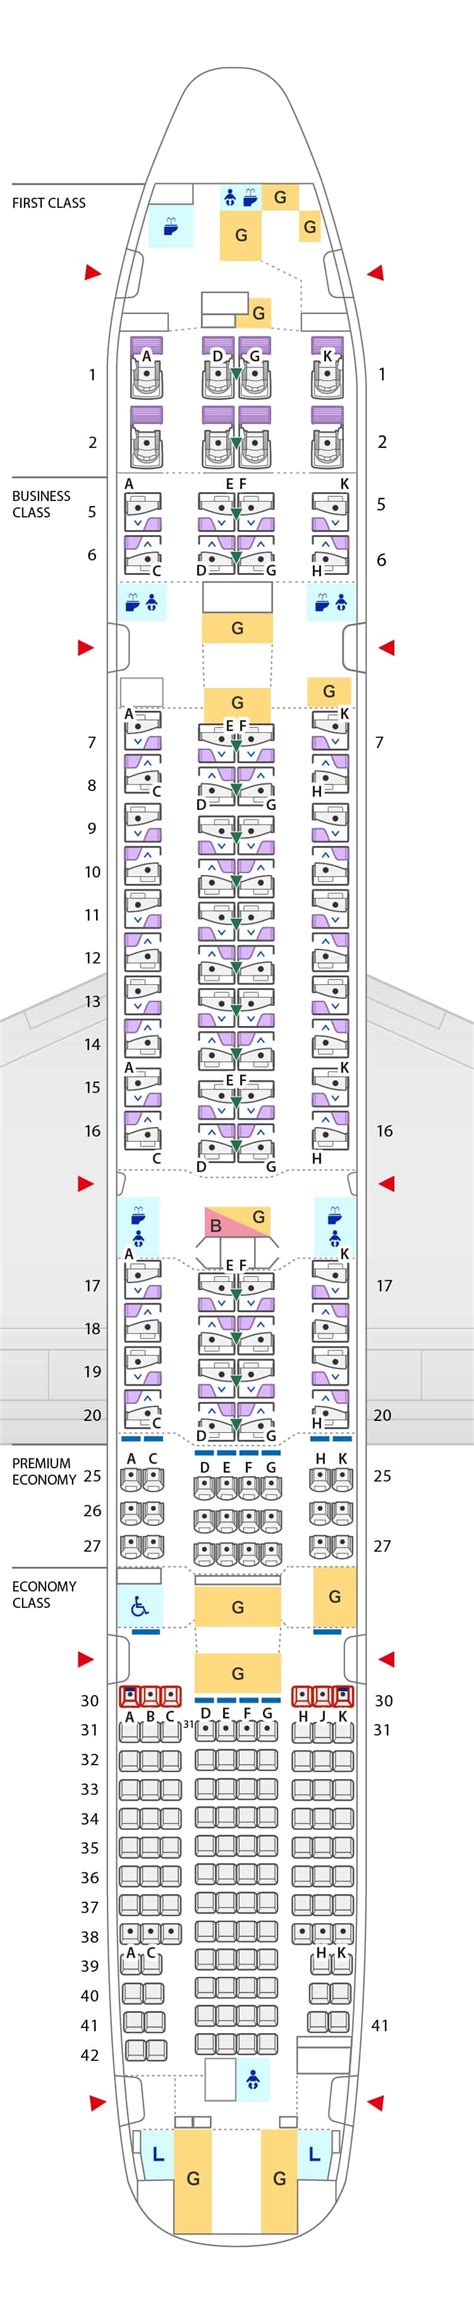 Boeing Seating Chart Singapore Airlines Two Birds Home